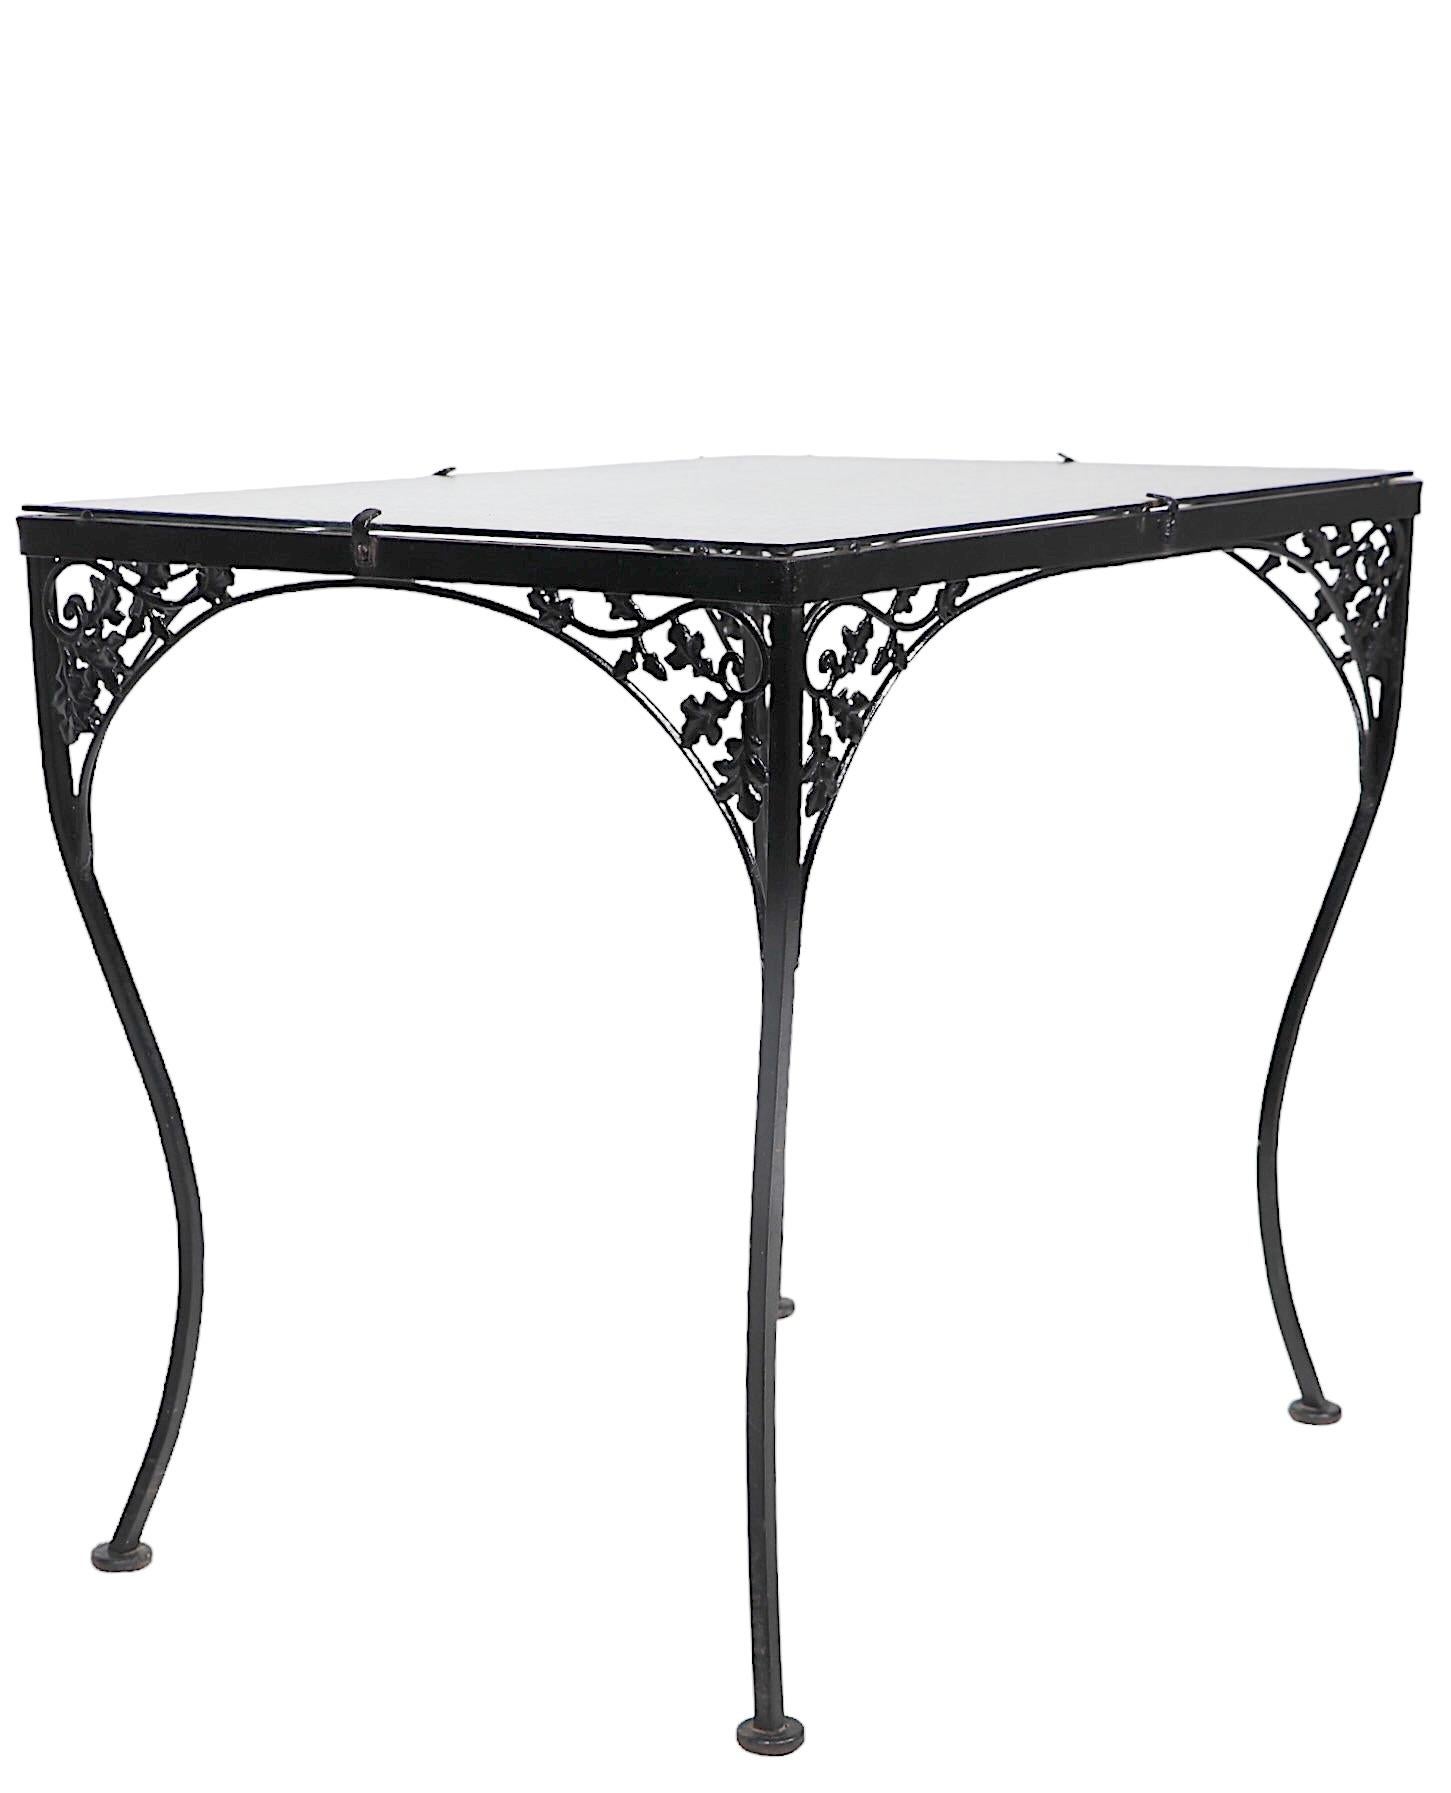 Ornate Wrought Iron and Glass Garden Patio Poolside Dining Table att. to Woodard In Good Condition For Sale In New York, NY